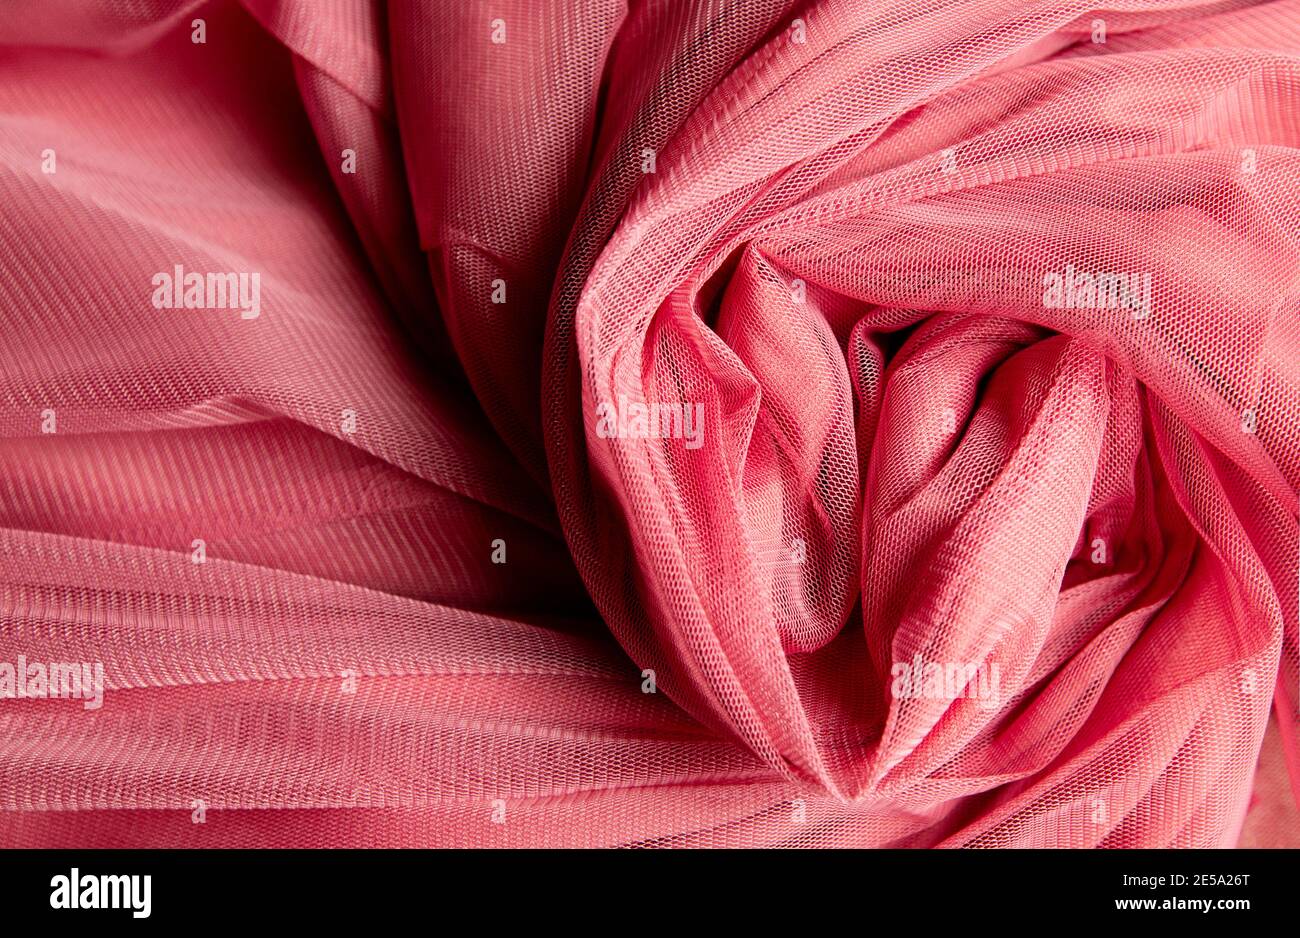 pink crumpled tulle fabric. fabric background Stock Photo